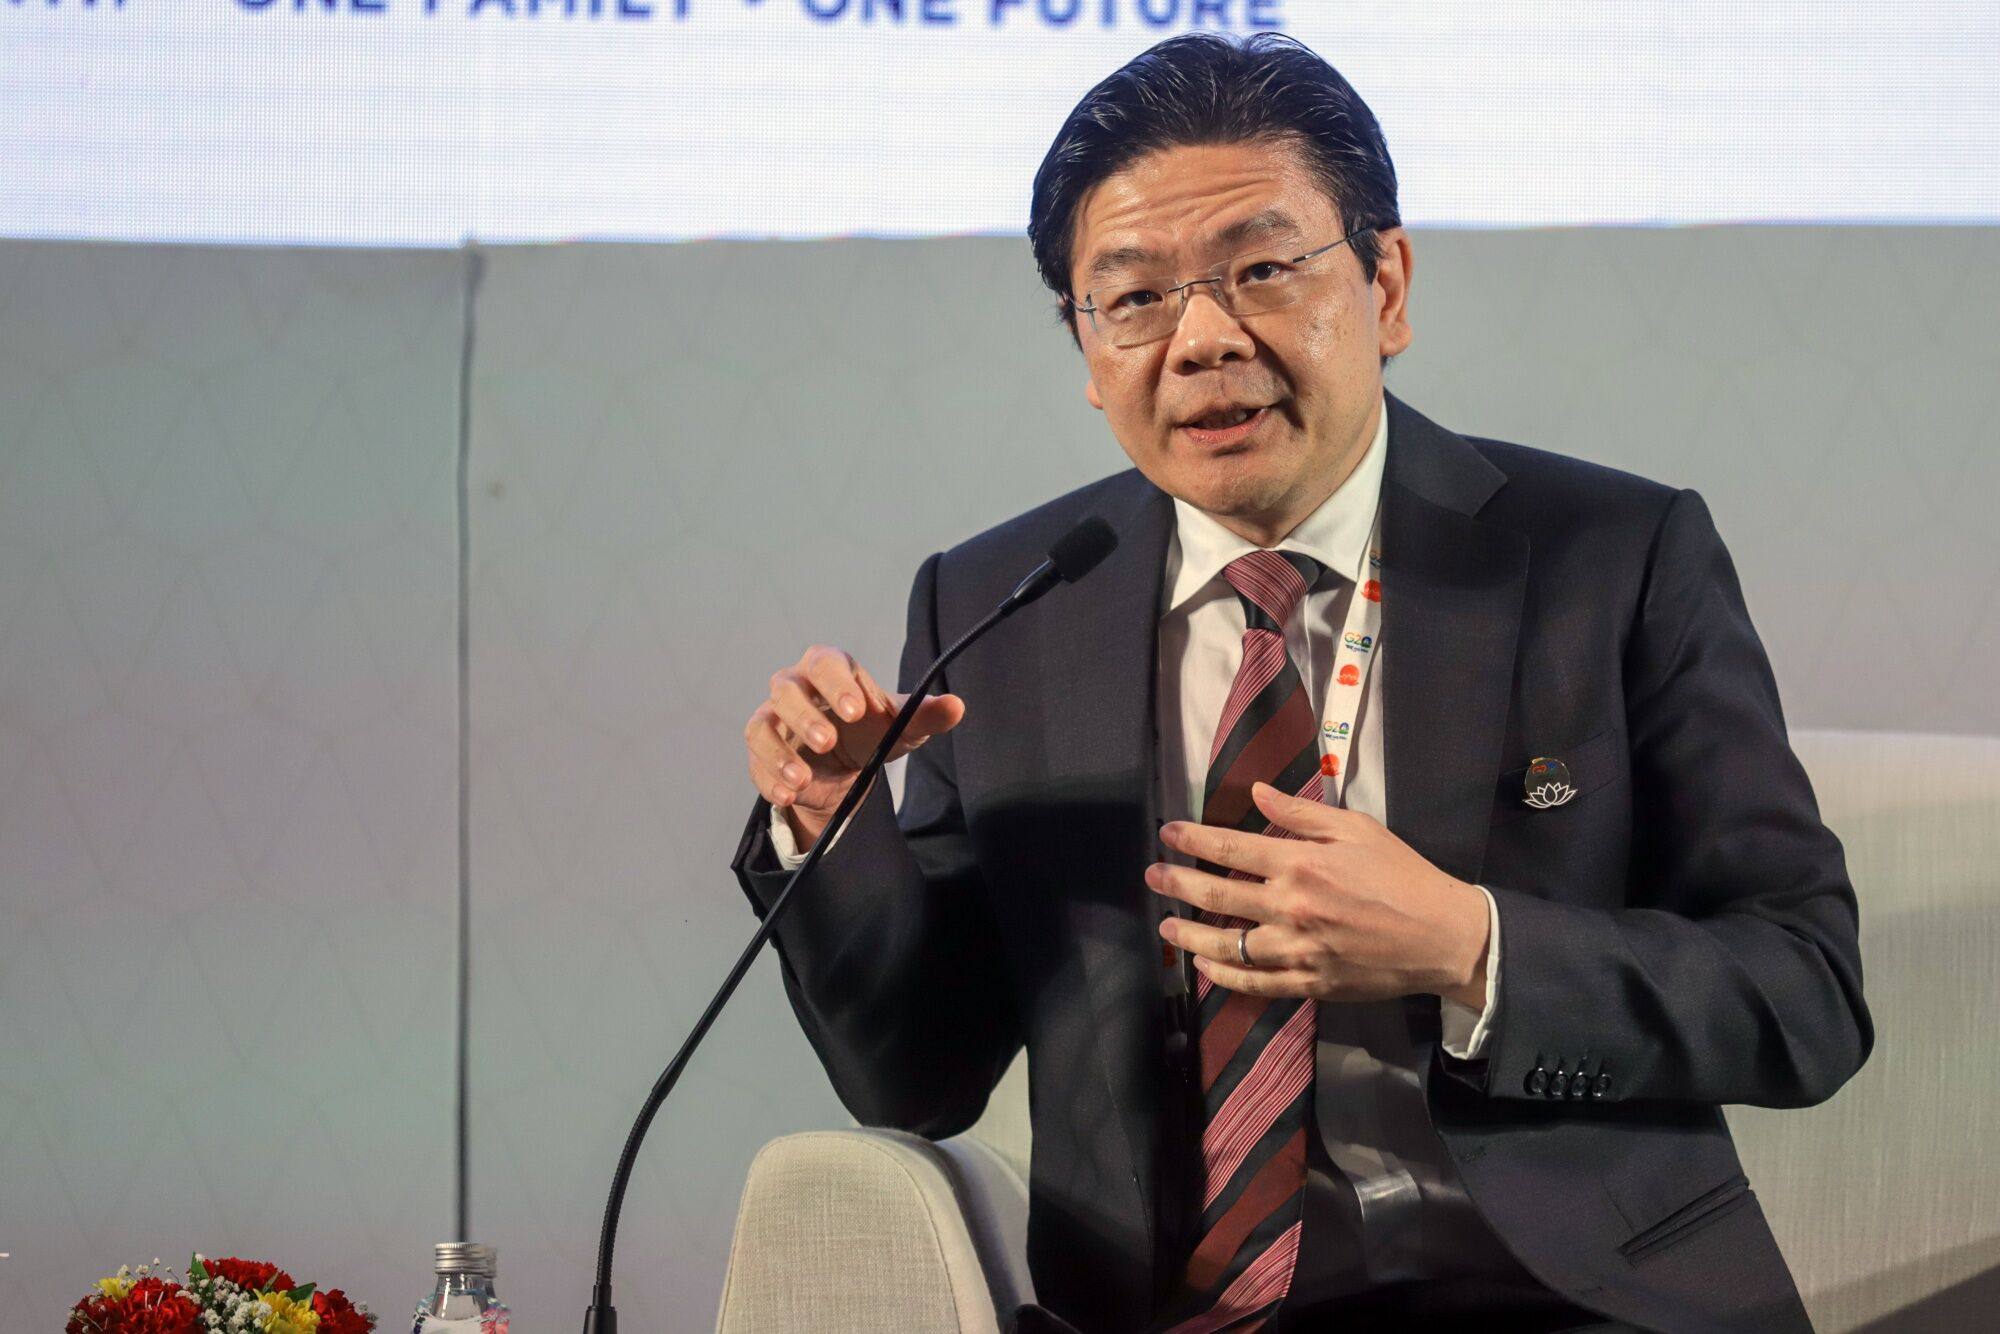 Deputy Prime Minister Lawrence Wong said the People’s Action Party had distinct policies regarding criminal wrongdoing and other forms of misconduct. Photo: Bloomberg